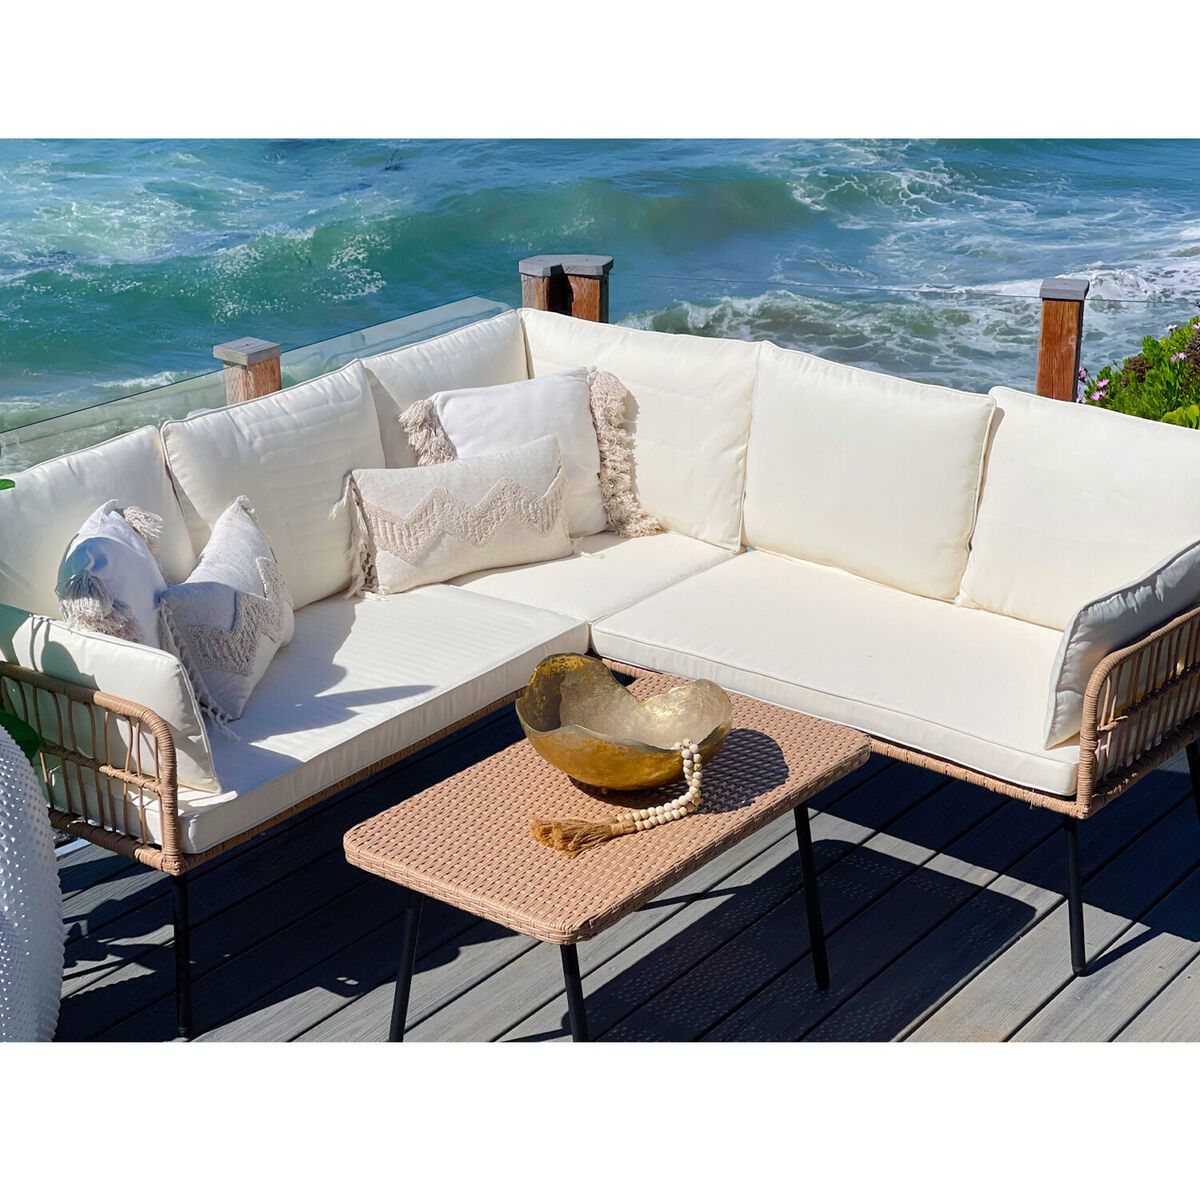 4Pcs Rattan Patio Furniture Set All Weather Wicker Sectional Sofa Coffee  Table | Ebay Within 4Pcs Rattan Patio Coffee Tables (View 9 of 15)